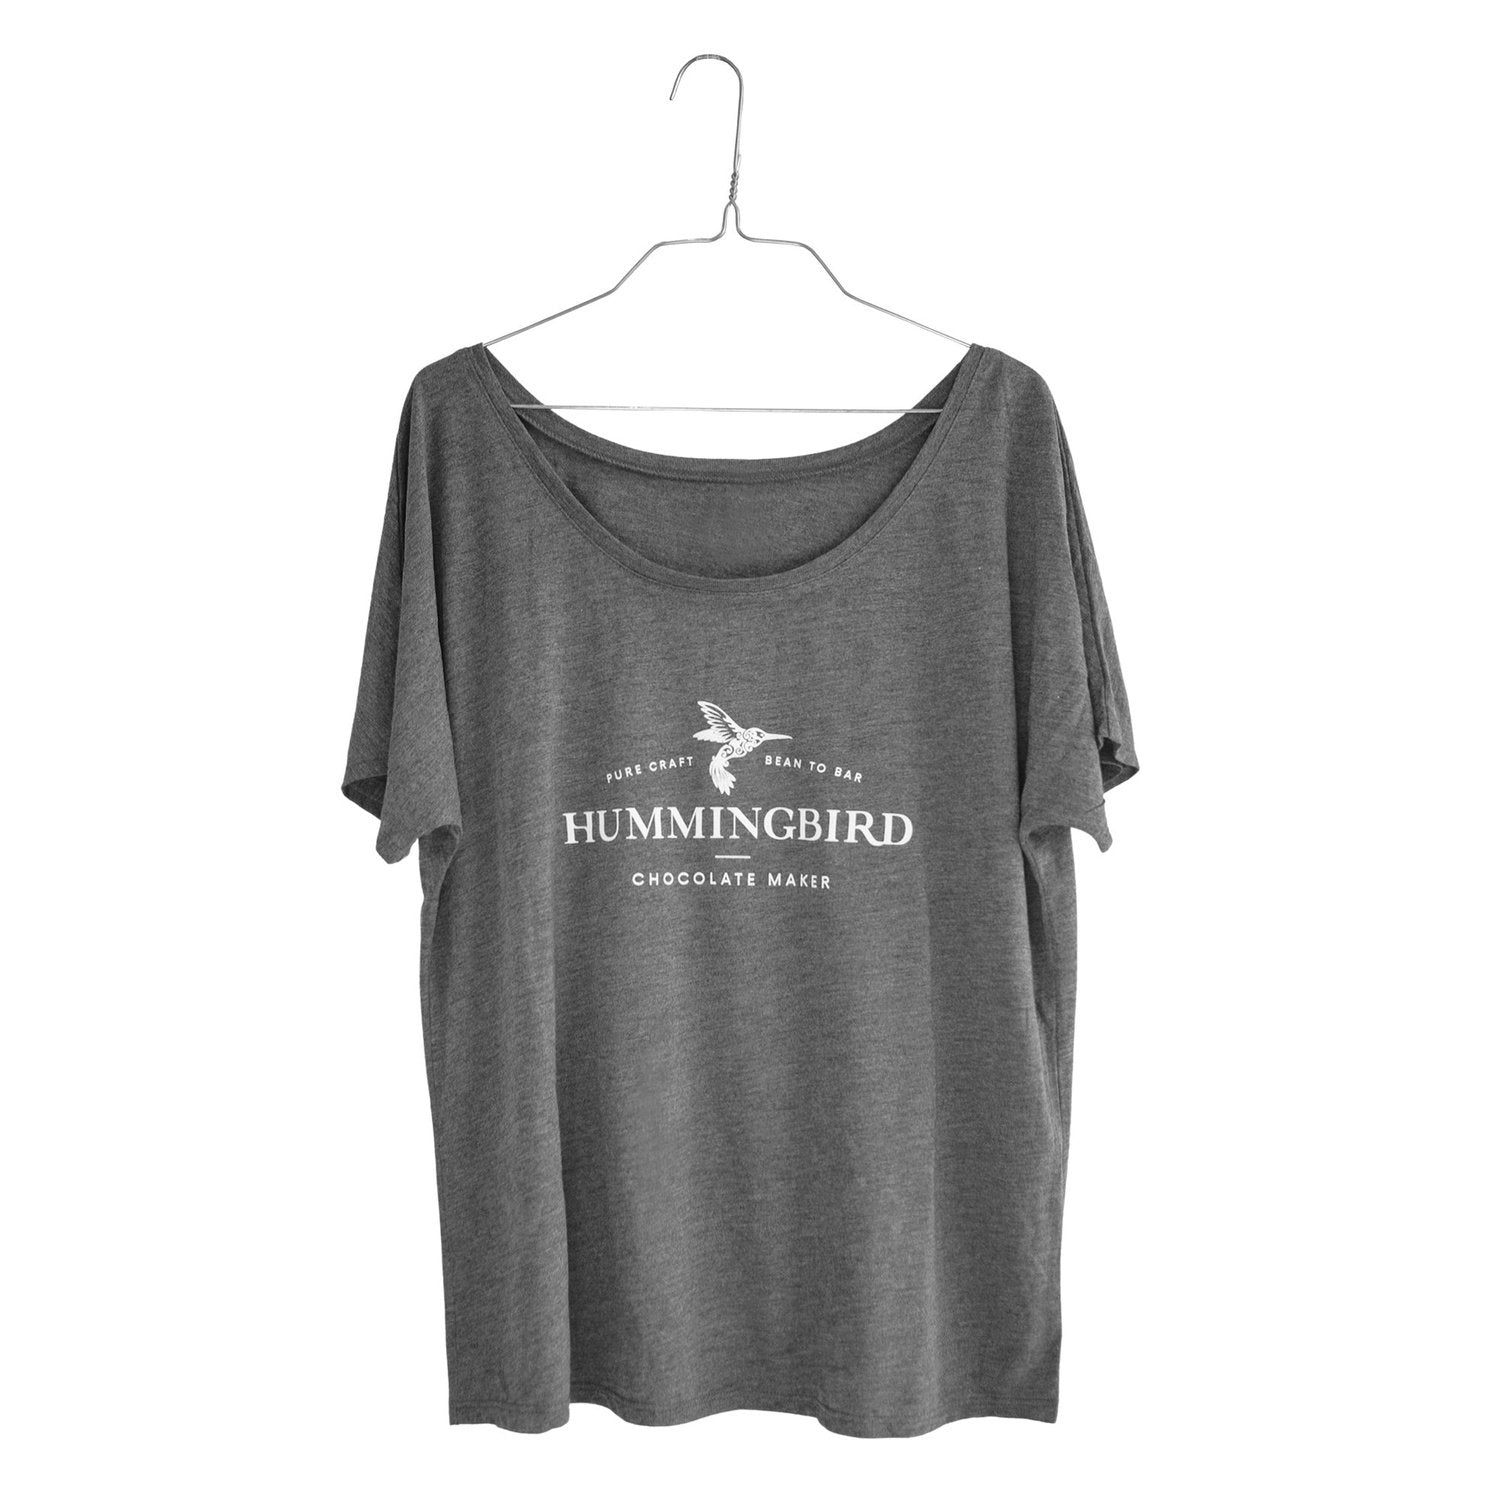 Dark Heather Grey Ladies' Slouchy Scoop-Neck T-Shirt with Hummingbird Chocolate Maker's logo imprinted on the front in center chest position